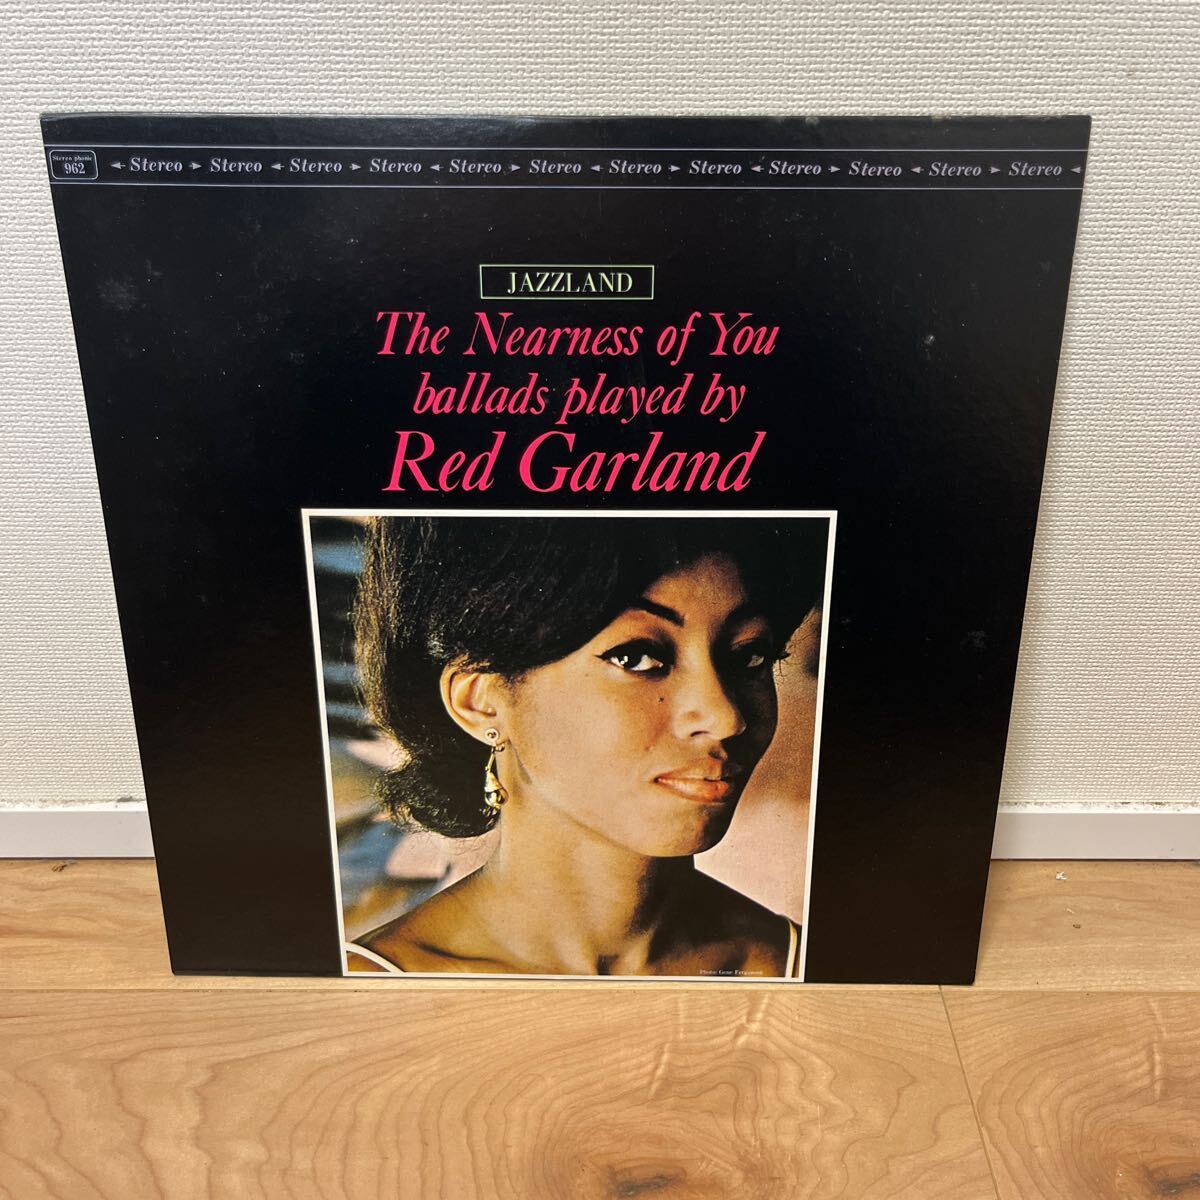 LP/JAZZLAND/The Nearness of you ballads played by Red Garland/RIVERSIDE/SMJ-6280(RS-6280)(JLP962)/国内盤/レッド ガーランド _画像1